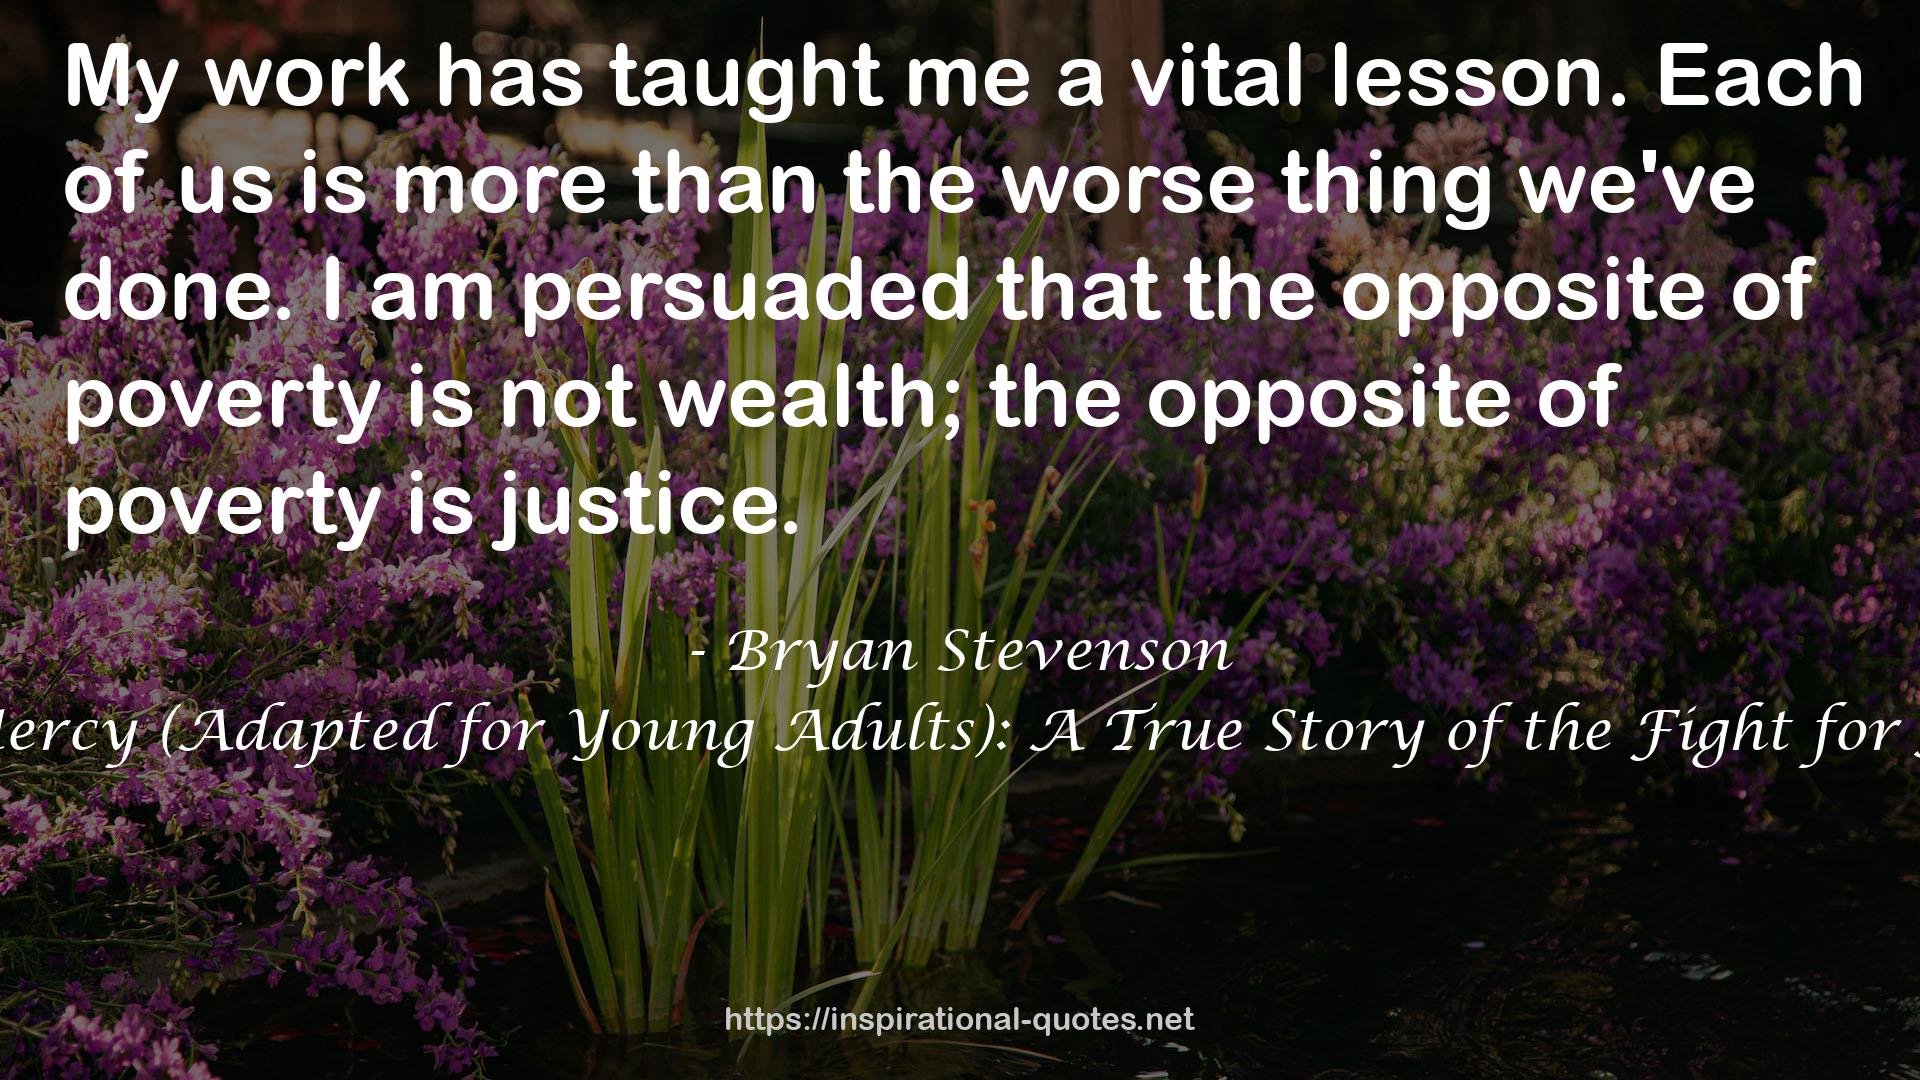 Just Mercy (Adapted for Young Adults): A True Story of the Fight for Justice QUOTES